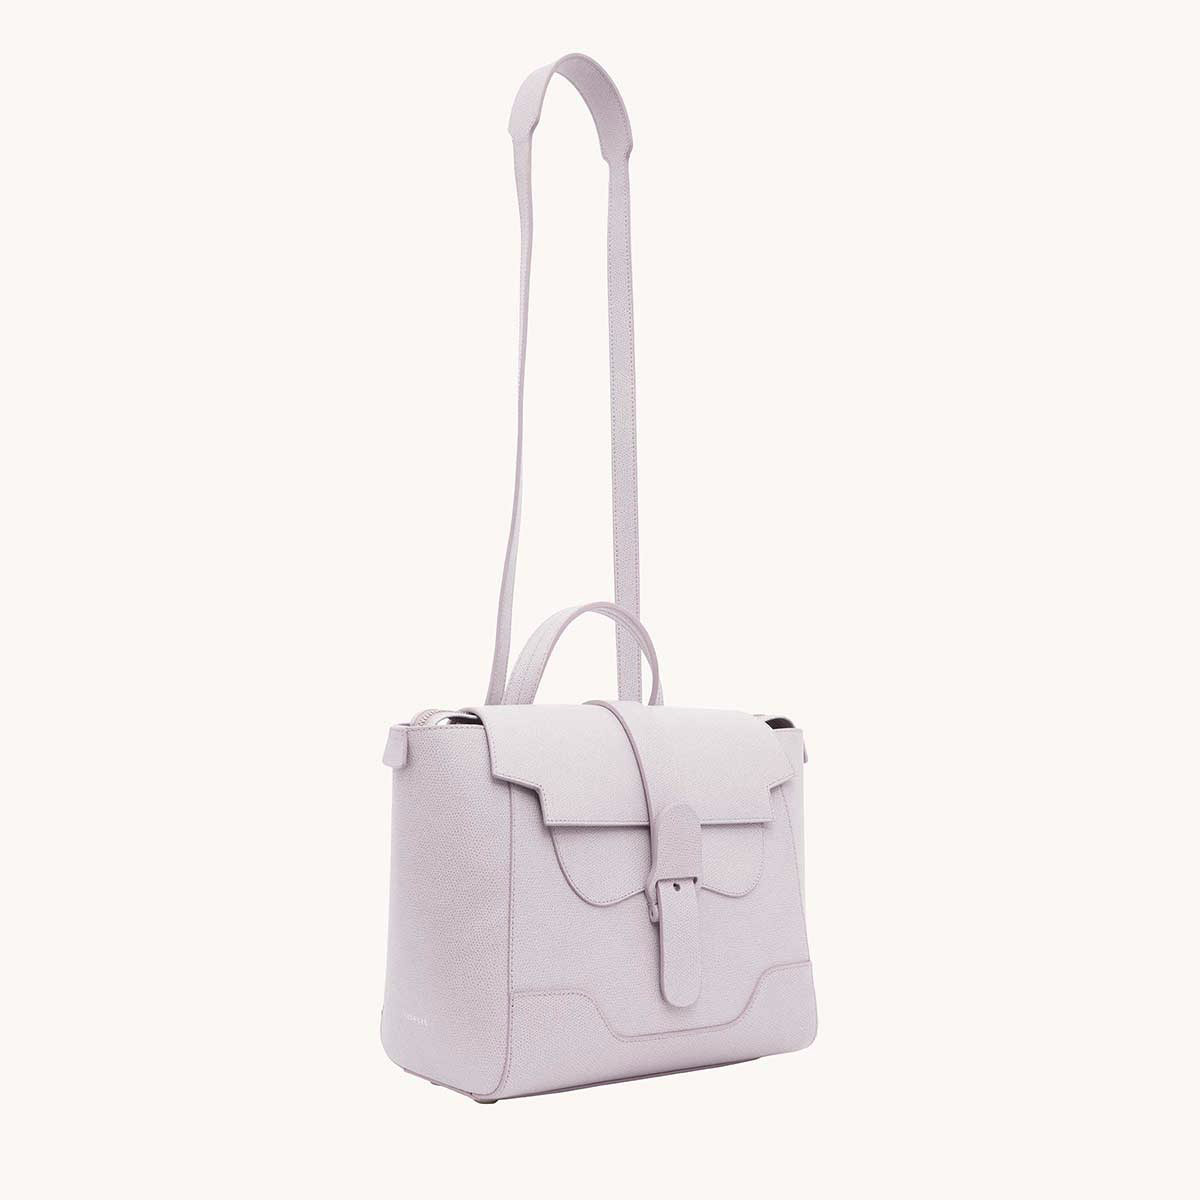 Midi Maestra Bag Pebbled Lavender with Silver Hardware Front View with Long Strap